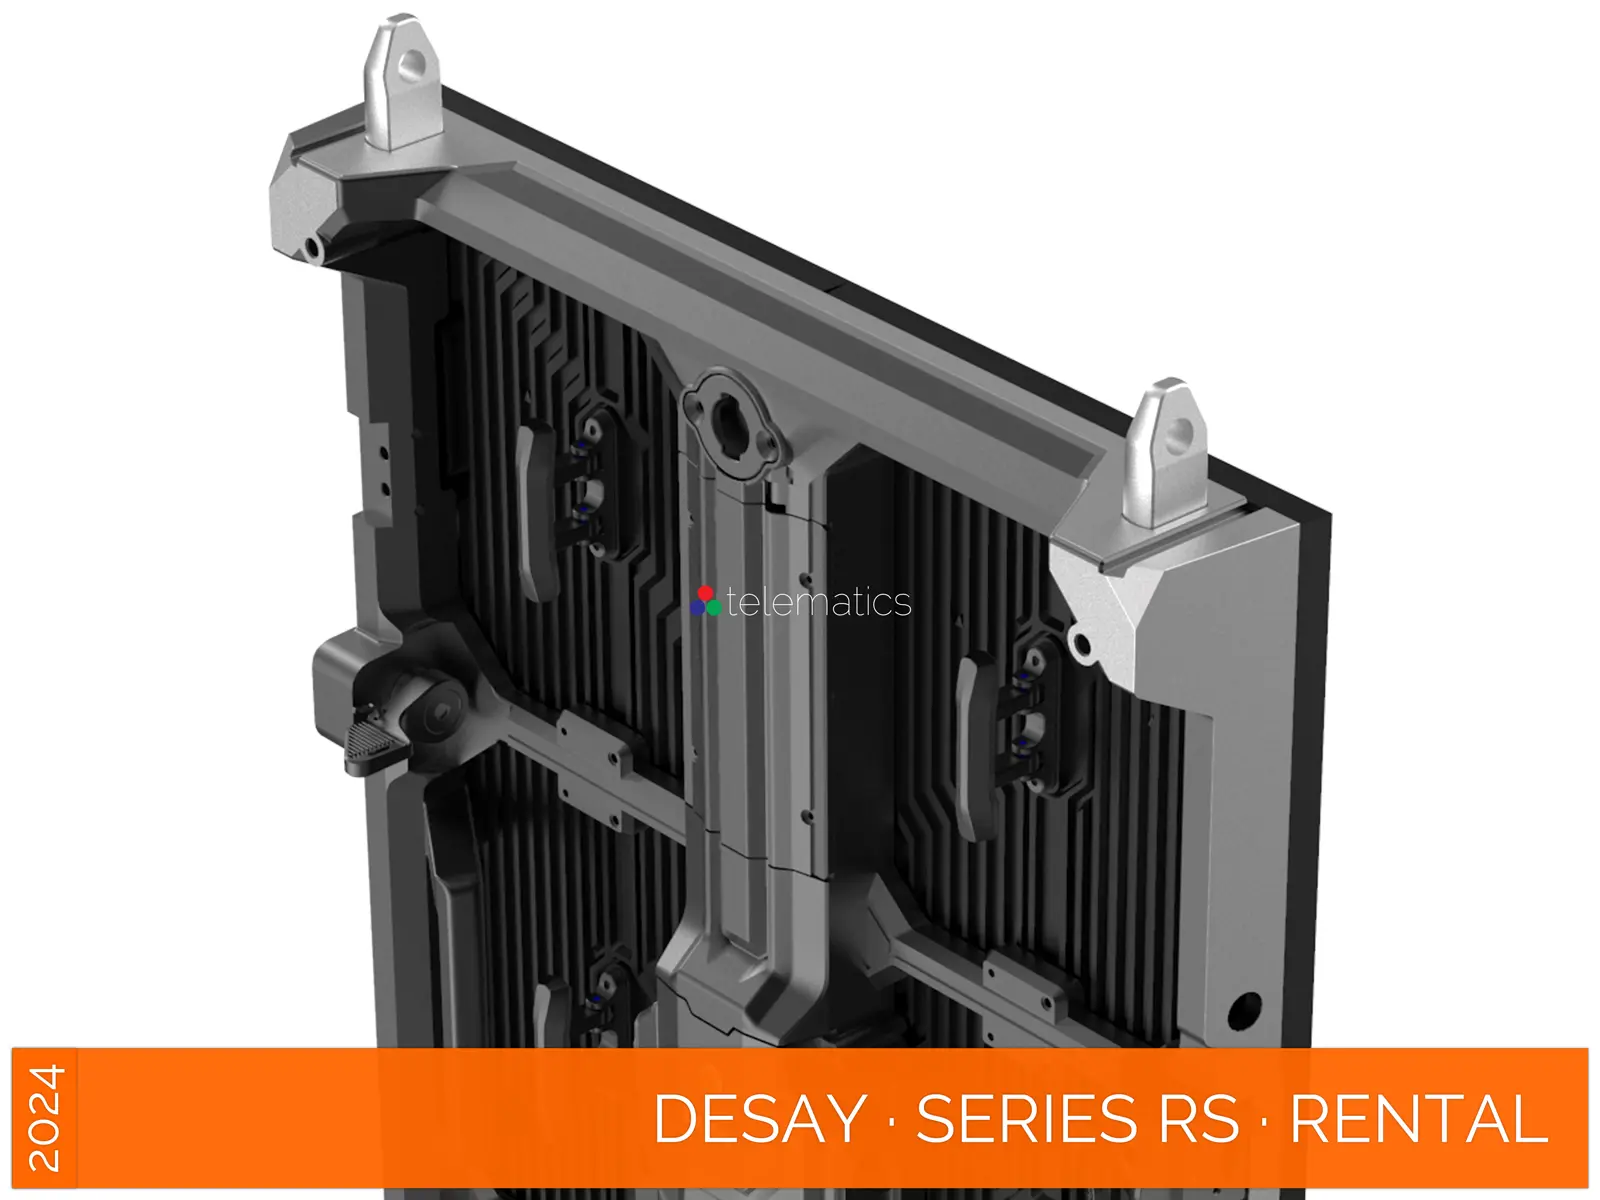 Desay · Series RS · Direct View LED Display Panel · Full Pixel Range · Rental Or Stage · Indoor Rated · Rapid Service And Setup · Built Tough For Rental And Stage Applications · NovaStar COEX MX CX · Vision Management Platform · Viplex · review · price · cost · priced from $1,790 per square meter